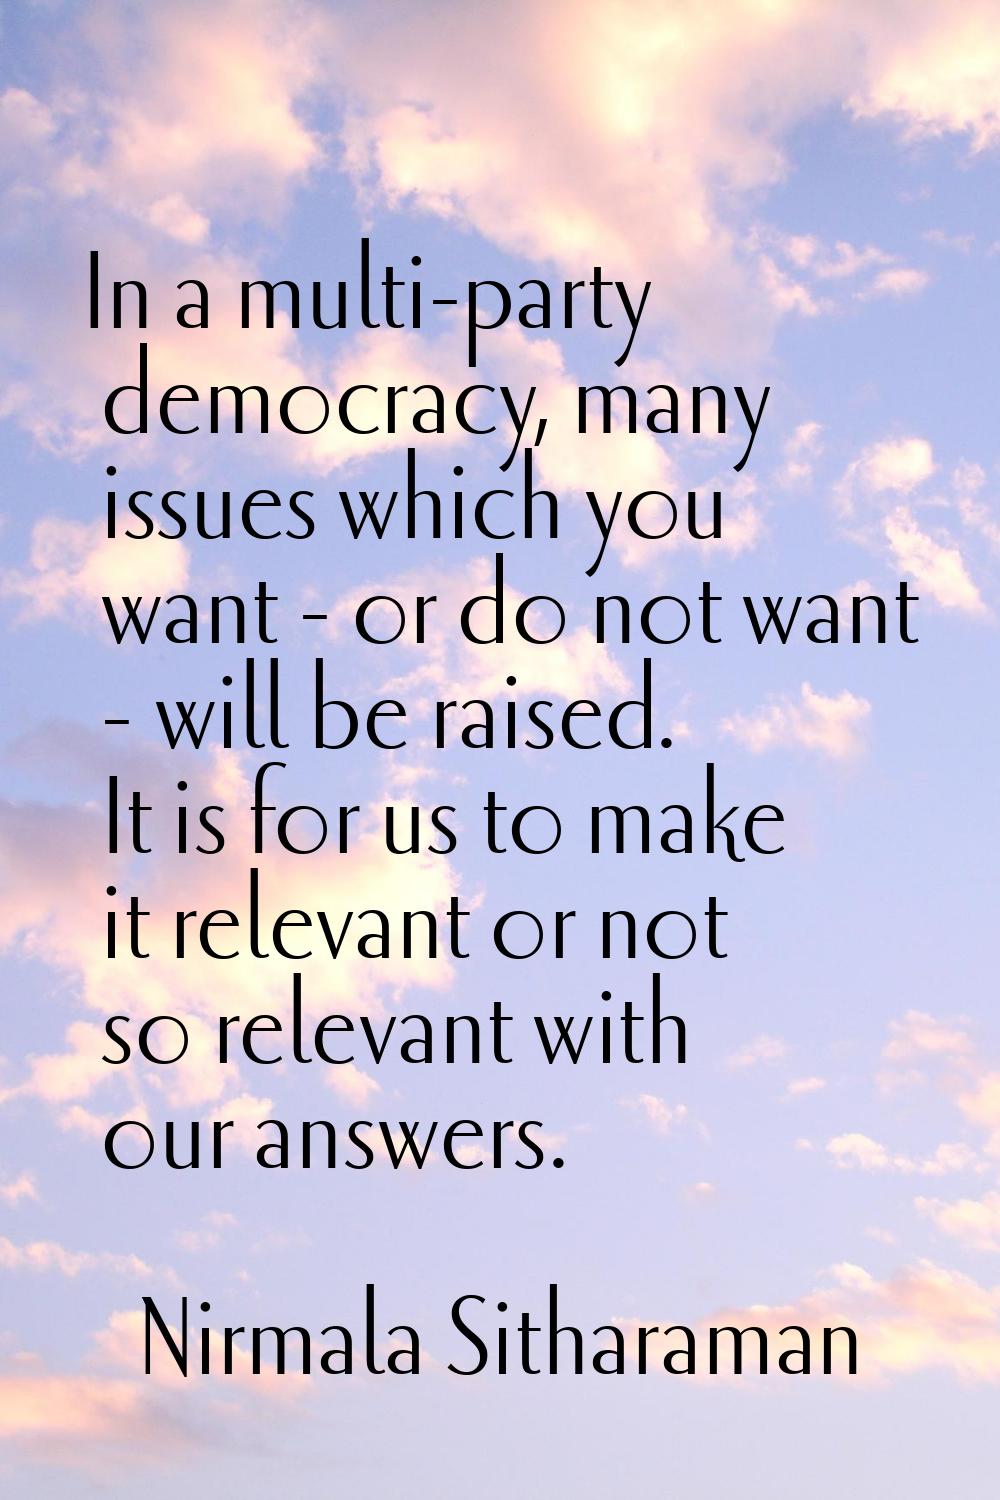 In a multi-party democracy, many issues which you want - or do not want - will be raised. It is for